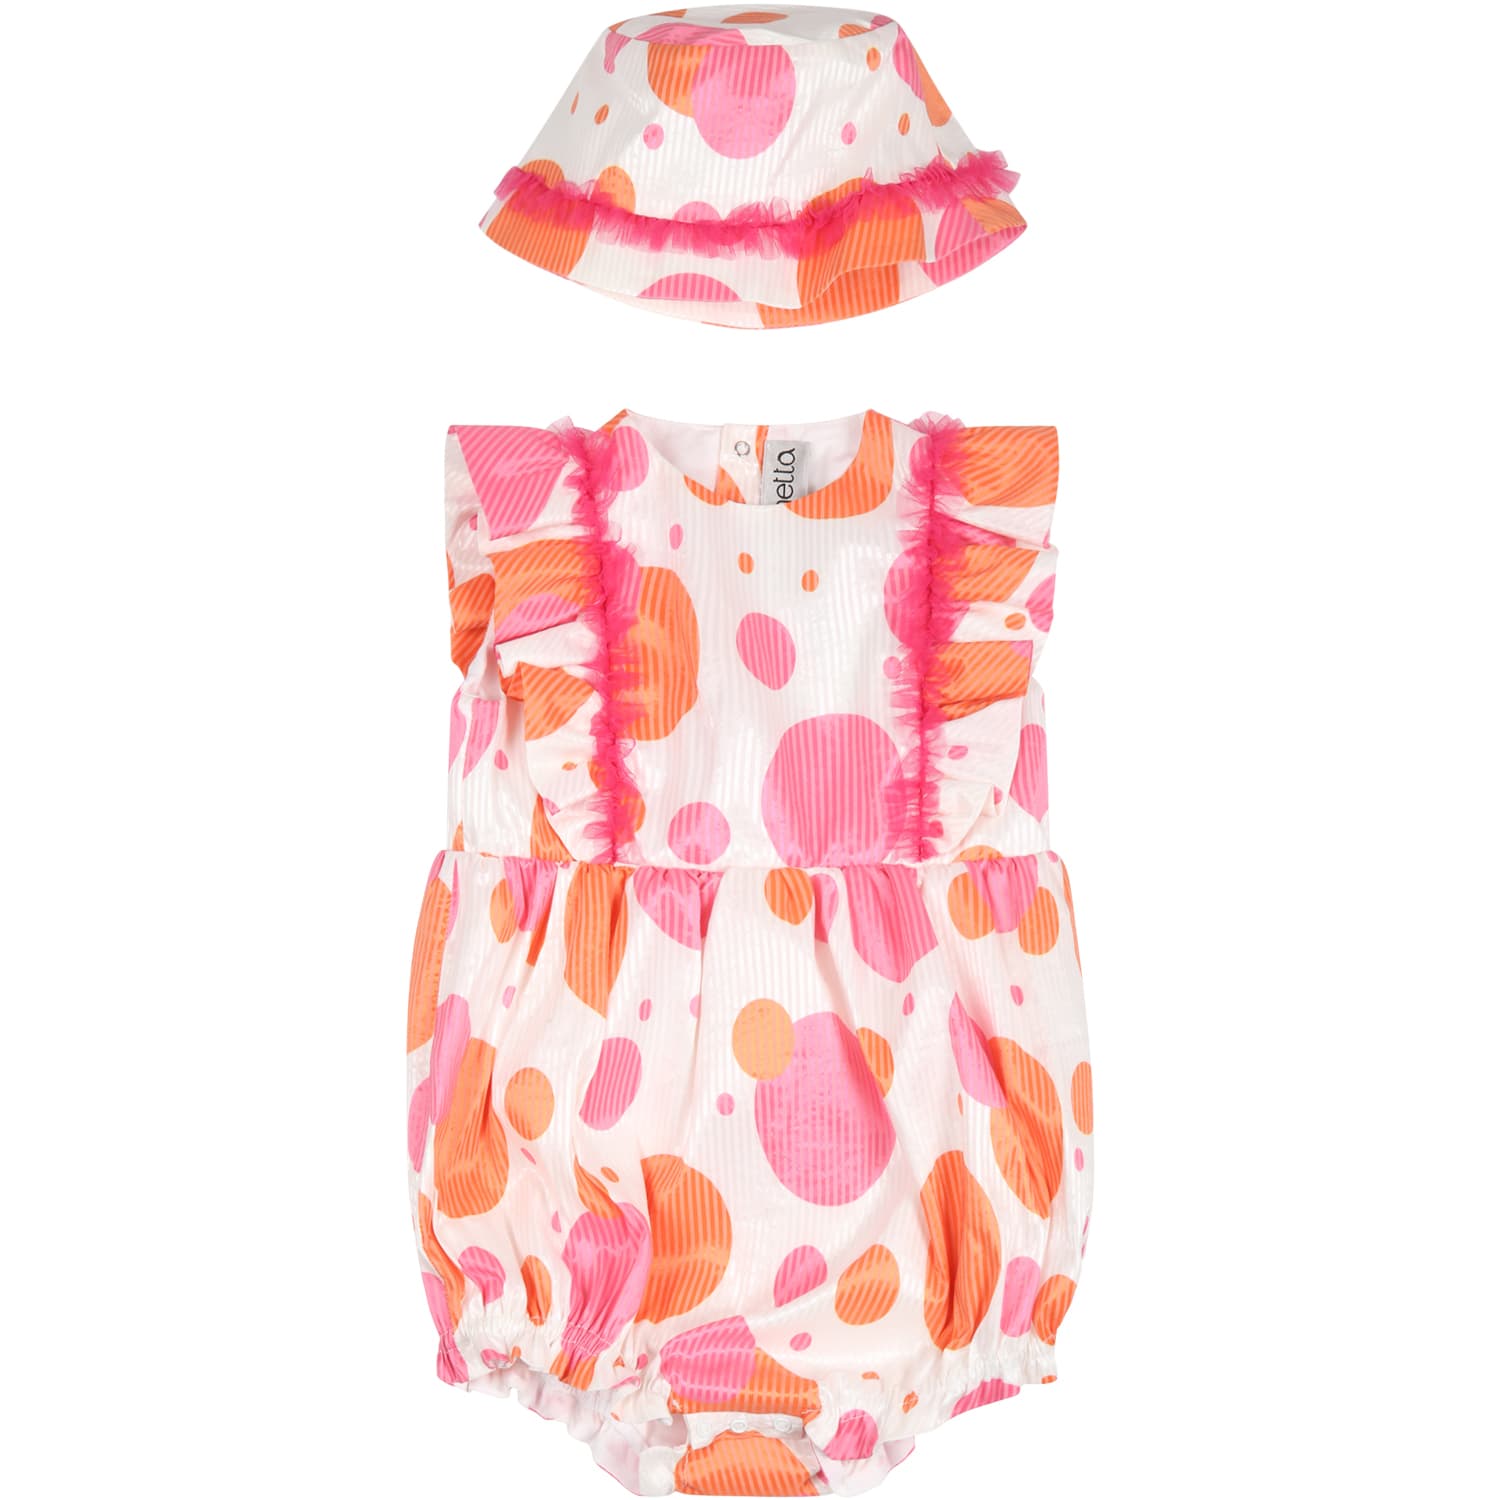 Simonetta White Set For Babygirl With Details Orange And Pink